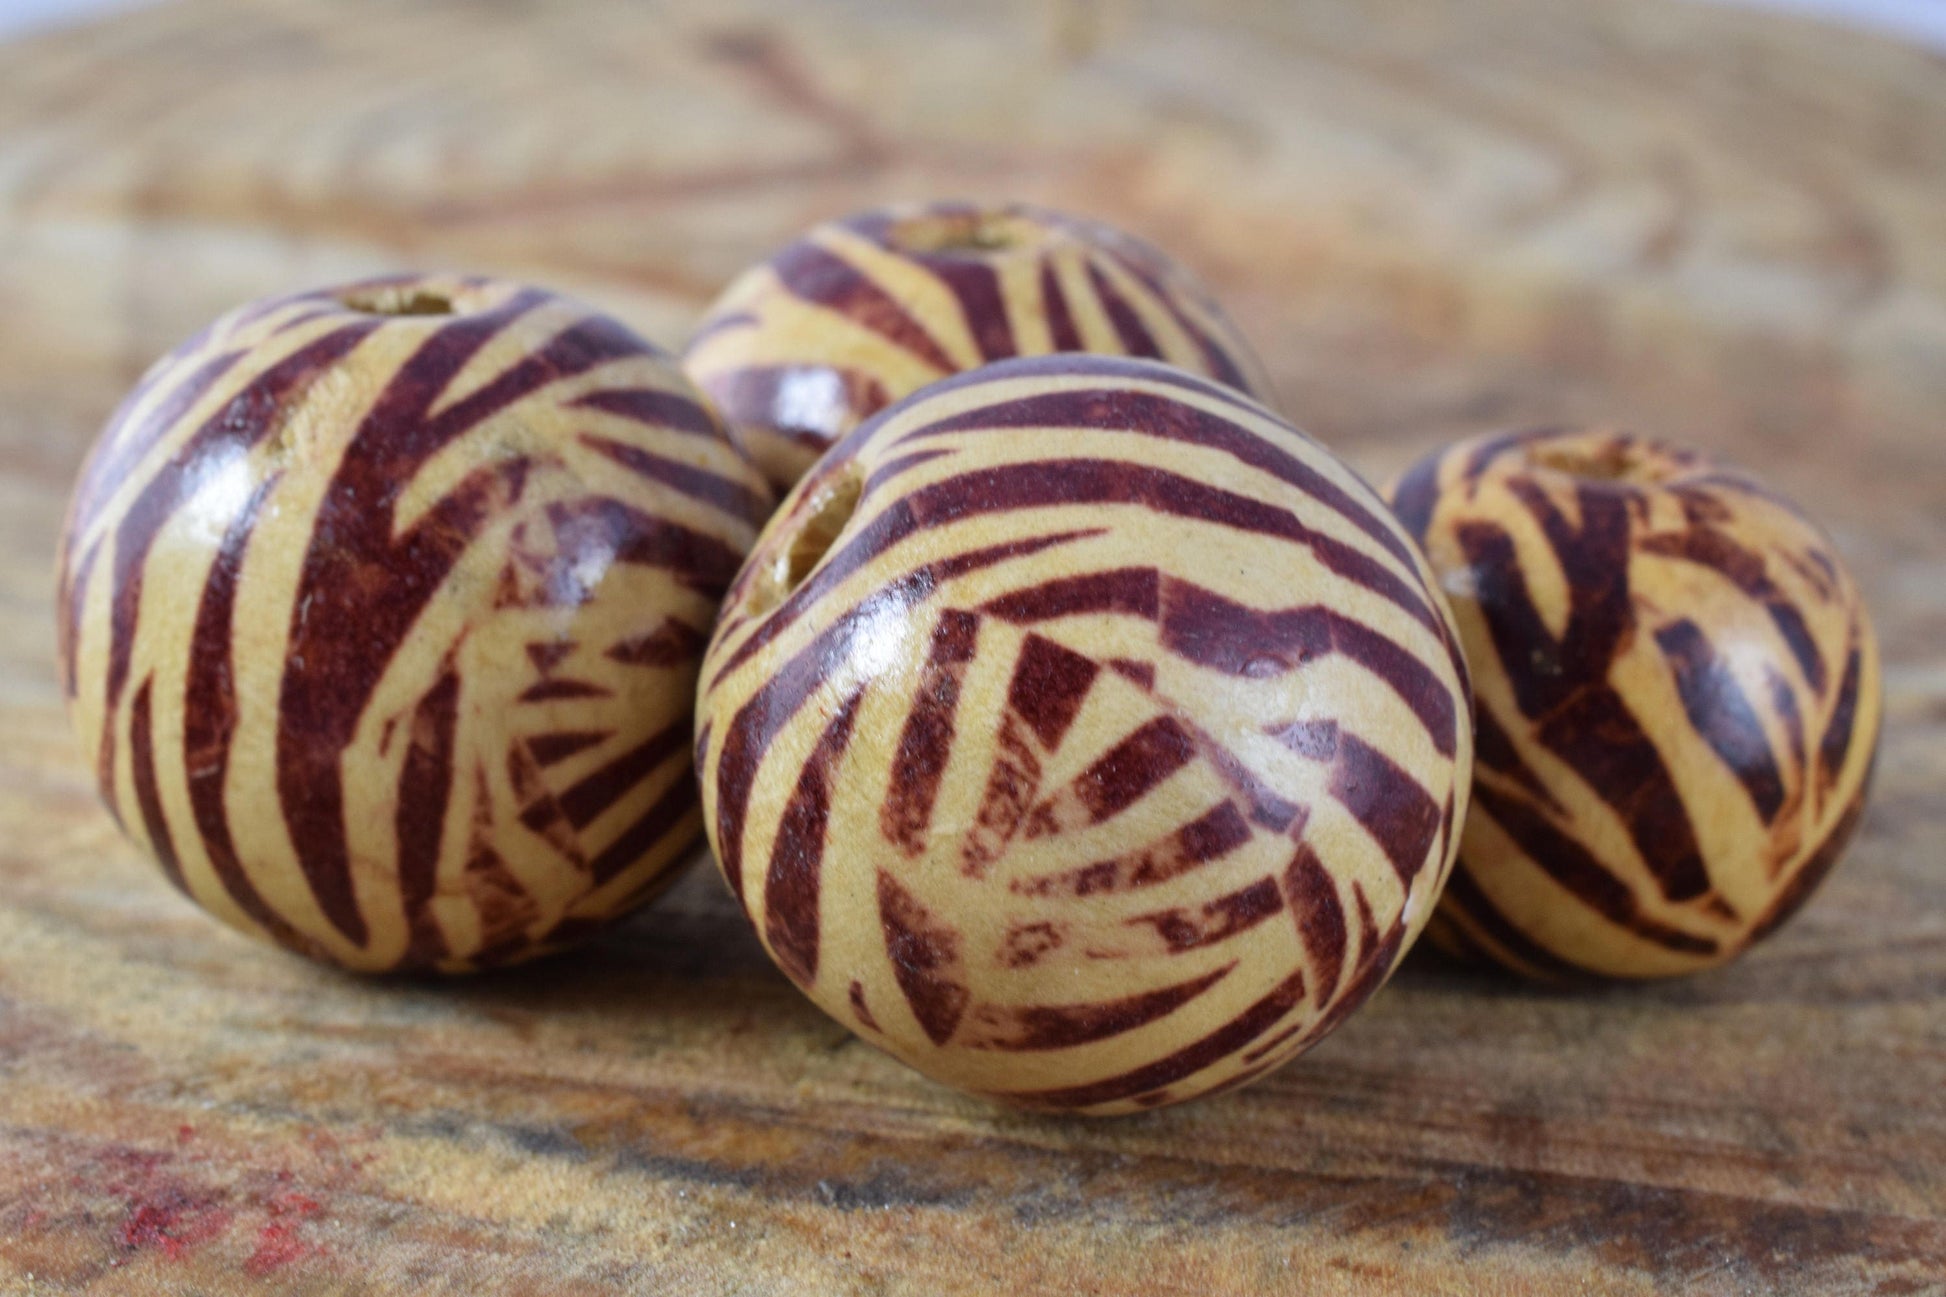 21mm/25mm Zebra Striped Brown Natural Wooden Beads/ Wholesale Beads/Craft Supplies/Tools Beads/Natural Wood/Recycled Wood Beads